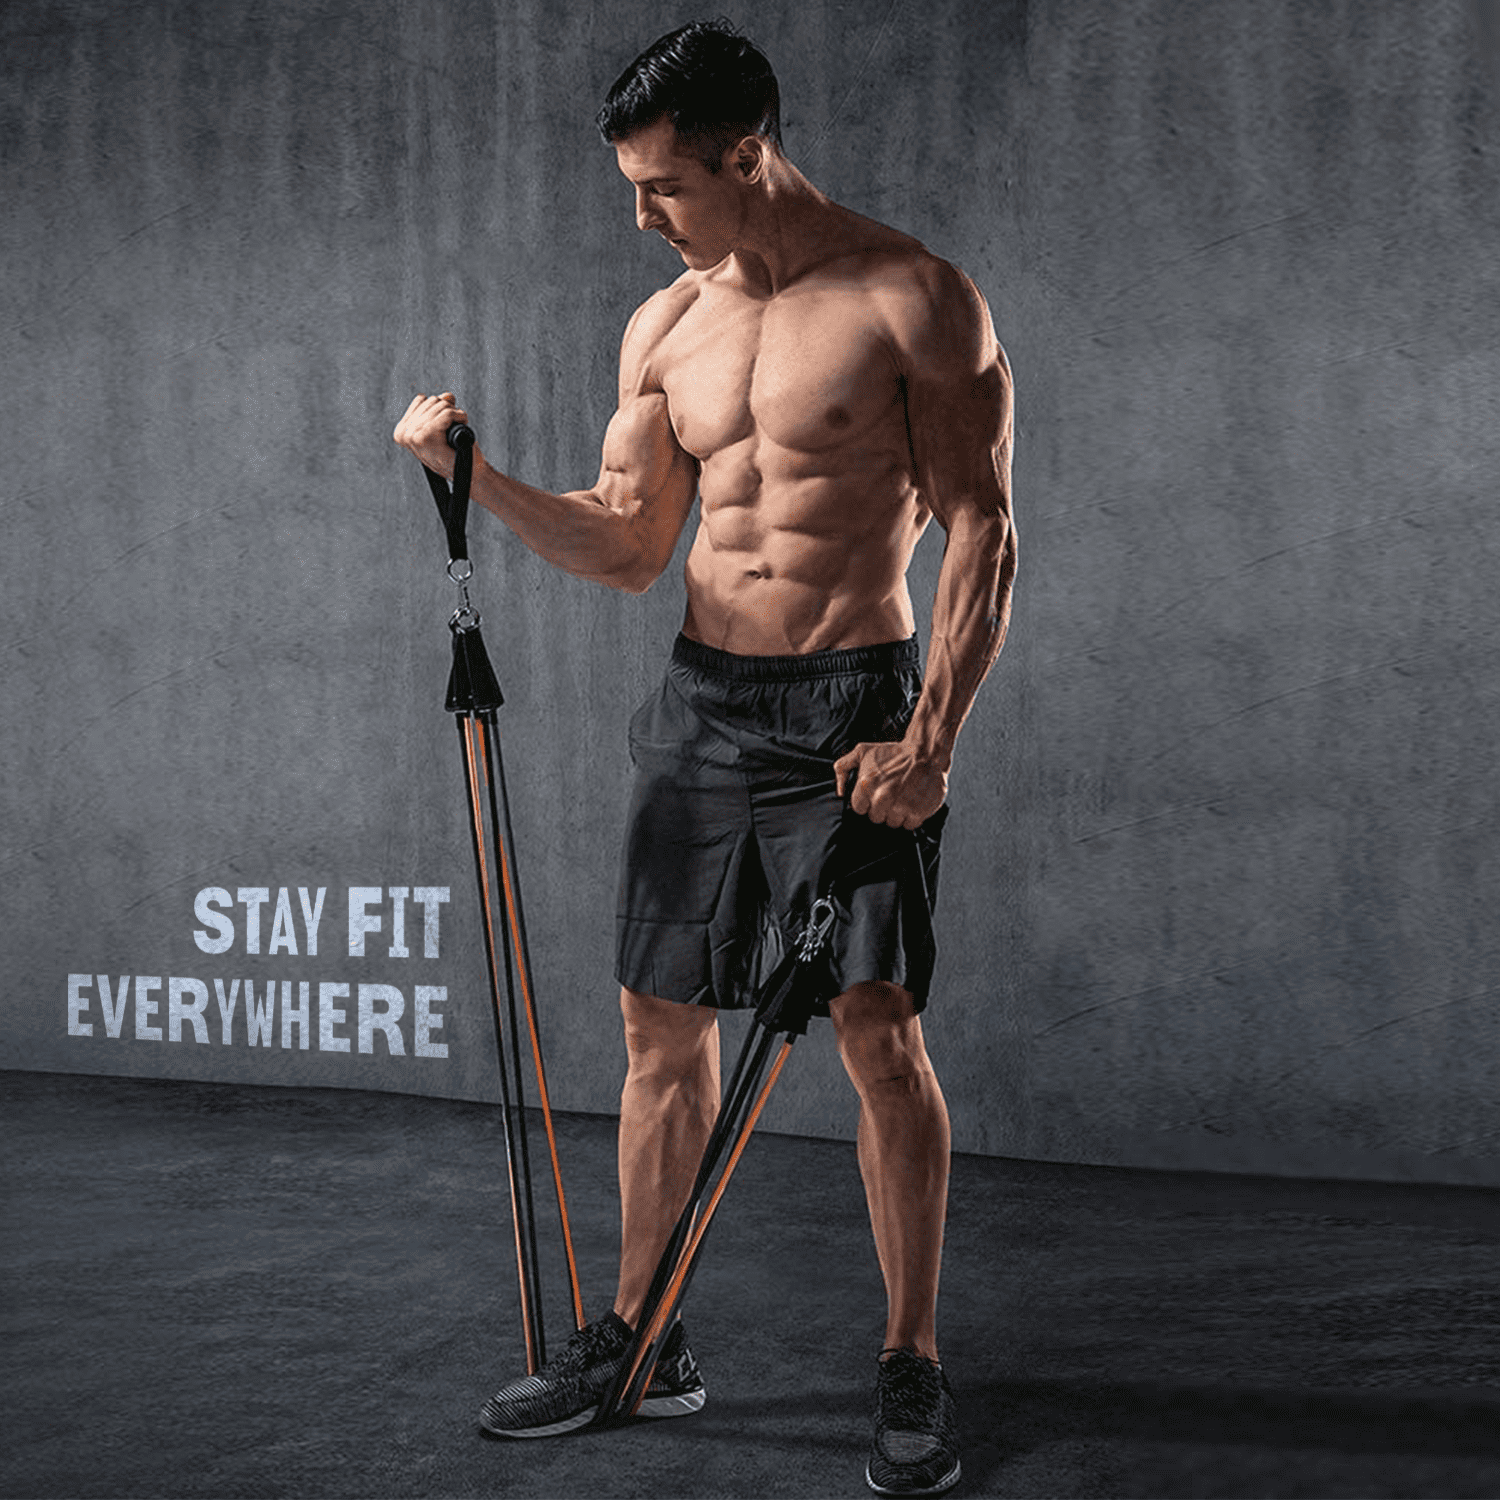 Details about   Portable Battle Rope Strap Anchor Gym Fitness Exercise HOME GYM Anywhere 